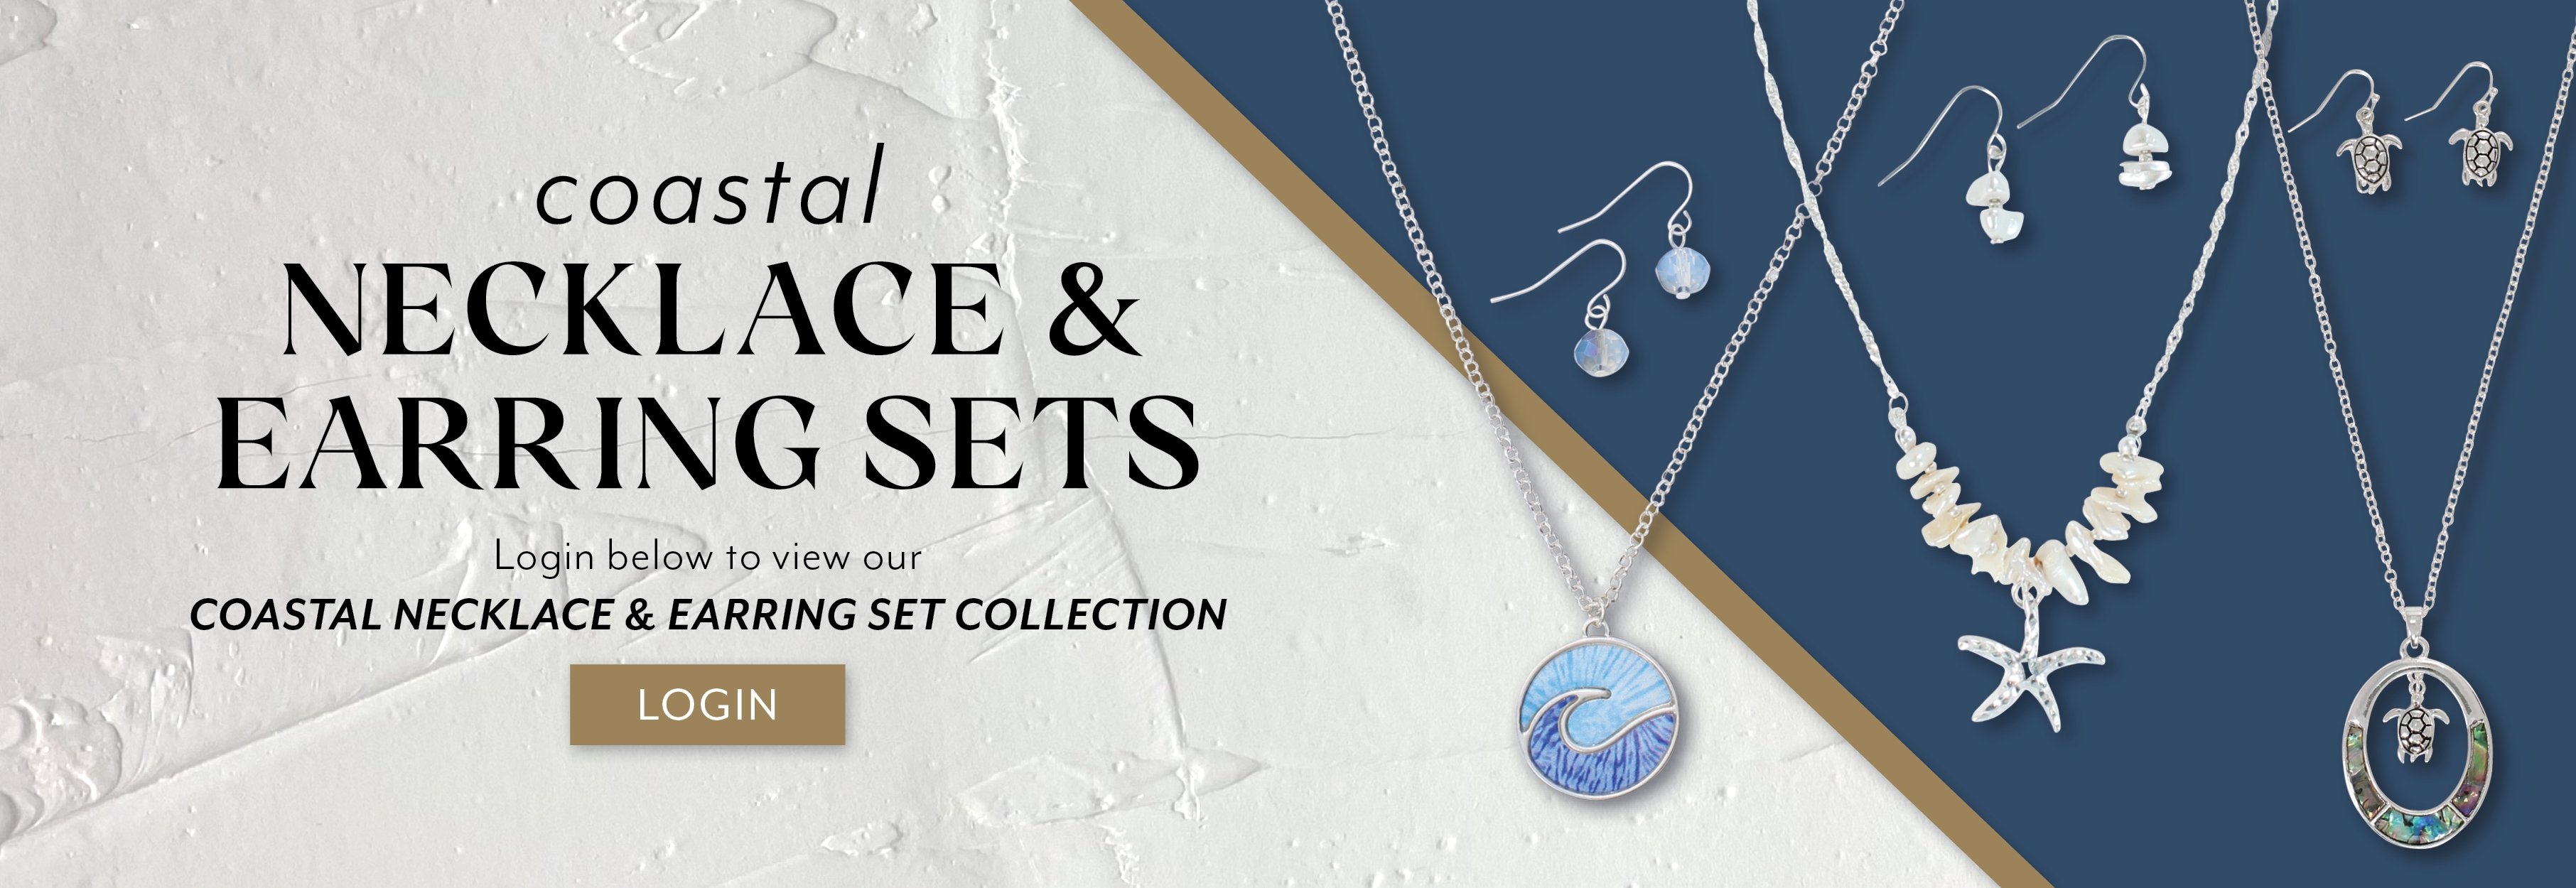 NECKLACE & EARRING SETS